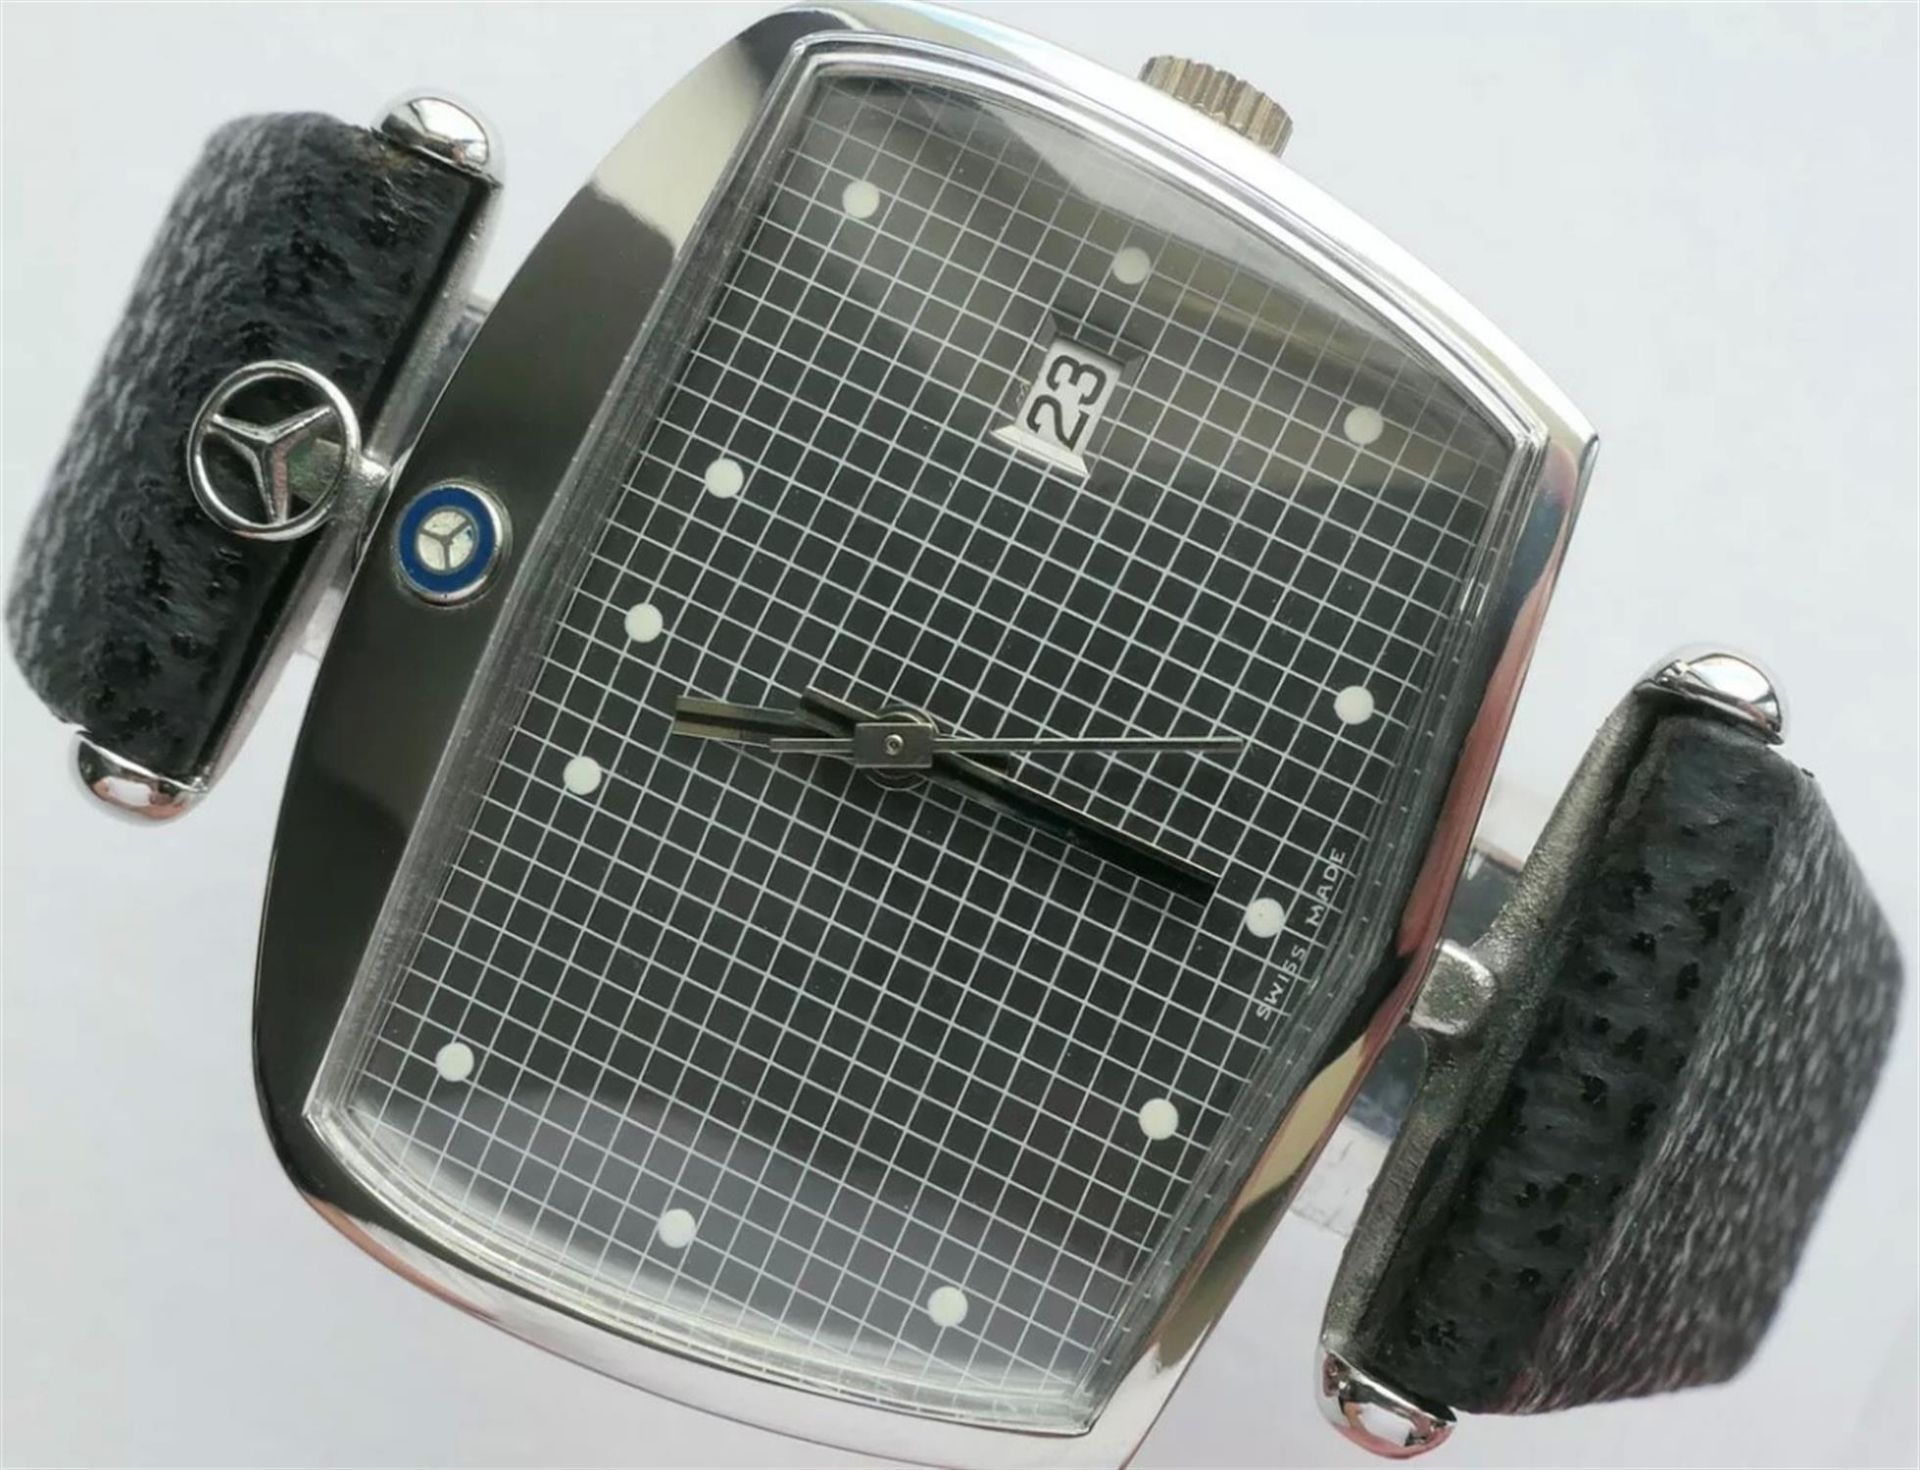 A Rare Mercedes-Benz 'Grille-Head' New Old Stock Wristwatch Evocative of the Famous German Marque - Image 3 of 10